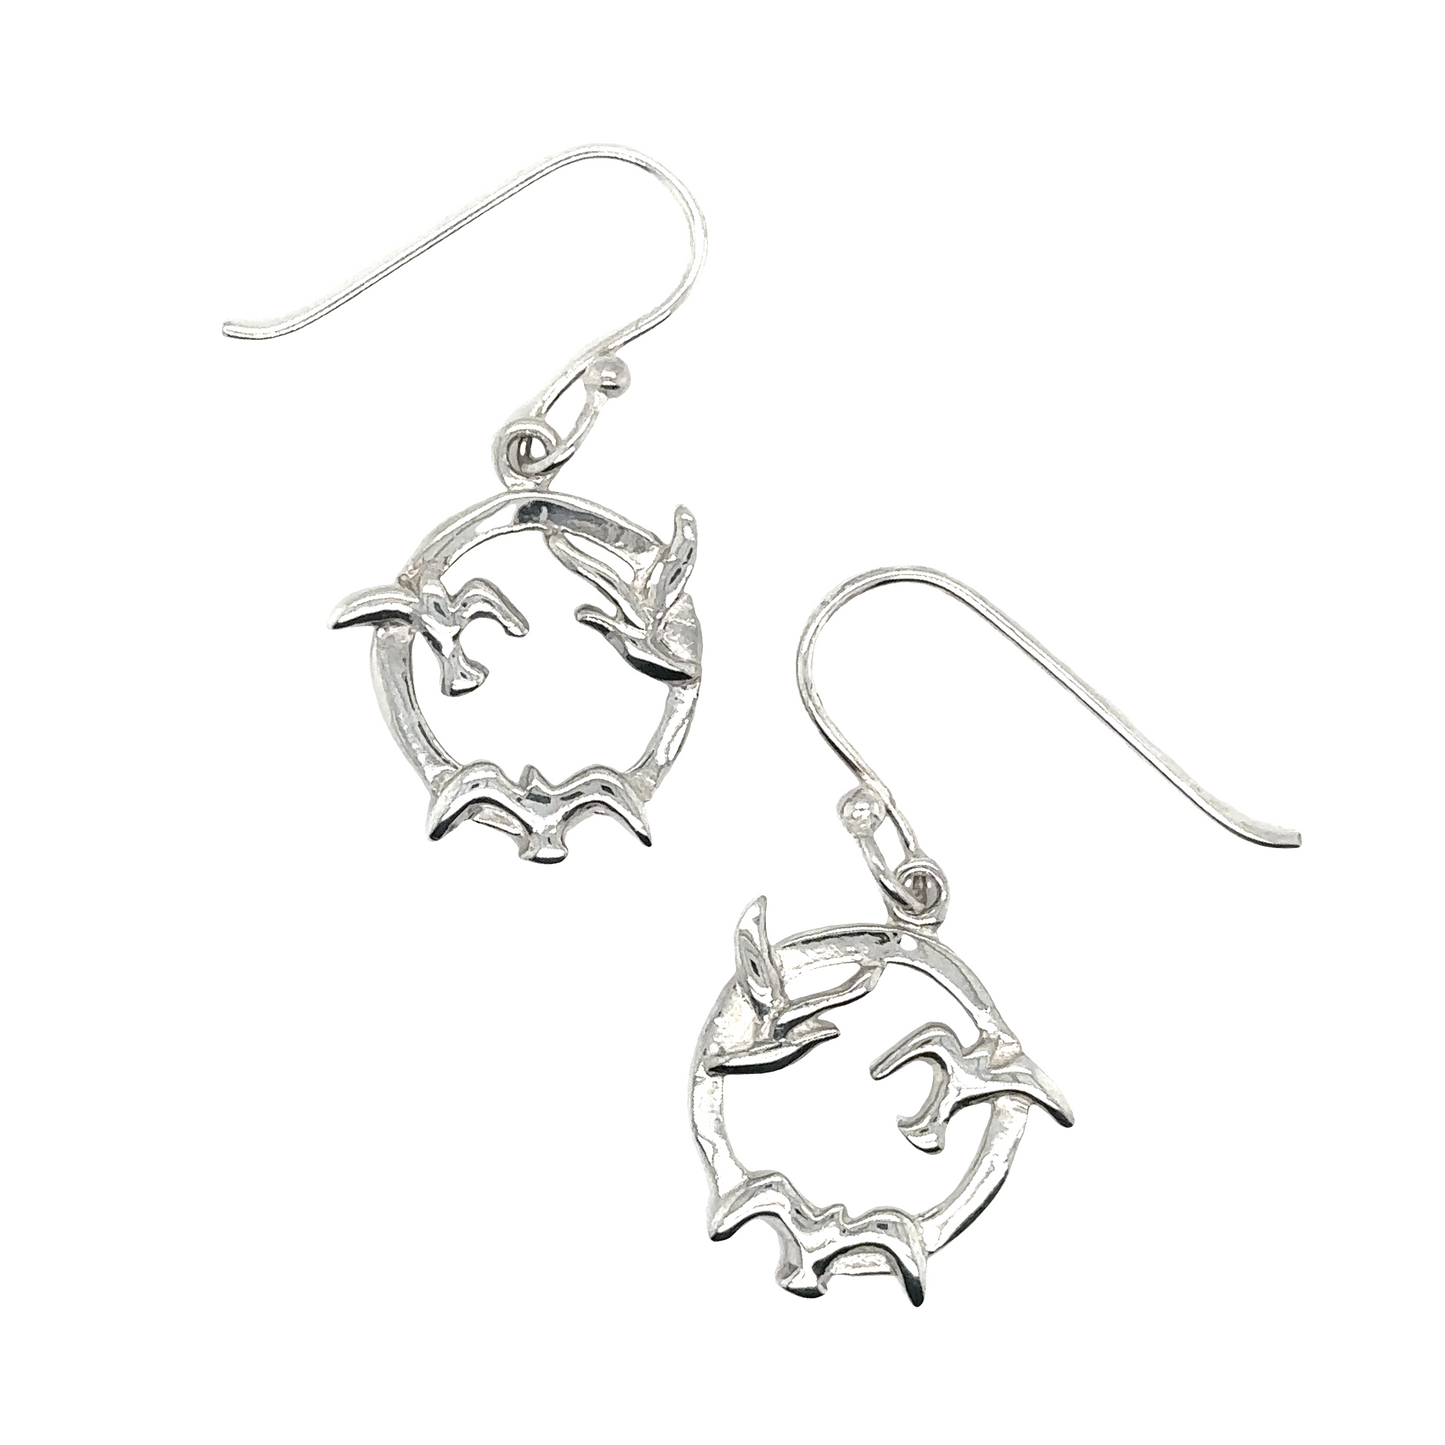 Super Silver's Three Seagulls Round Earrings .925 sterling silver hook earrings with birds.